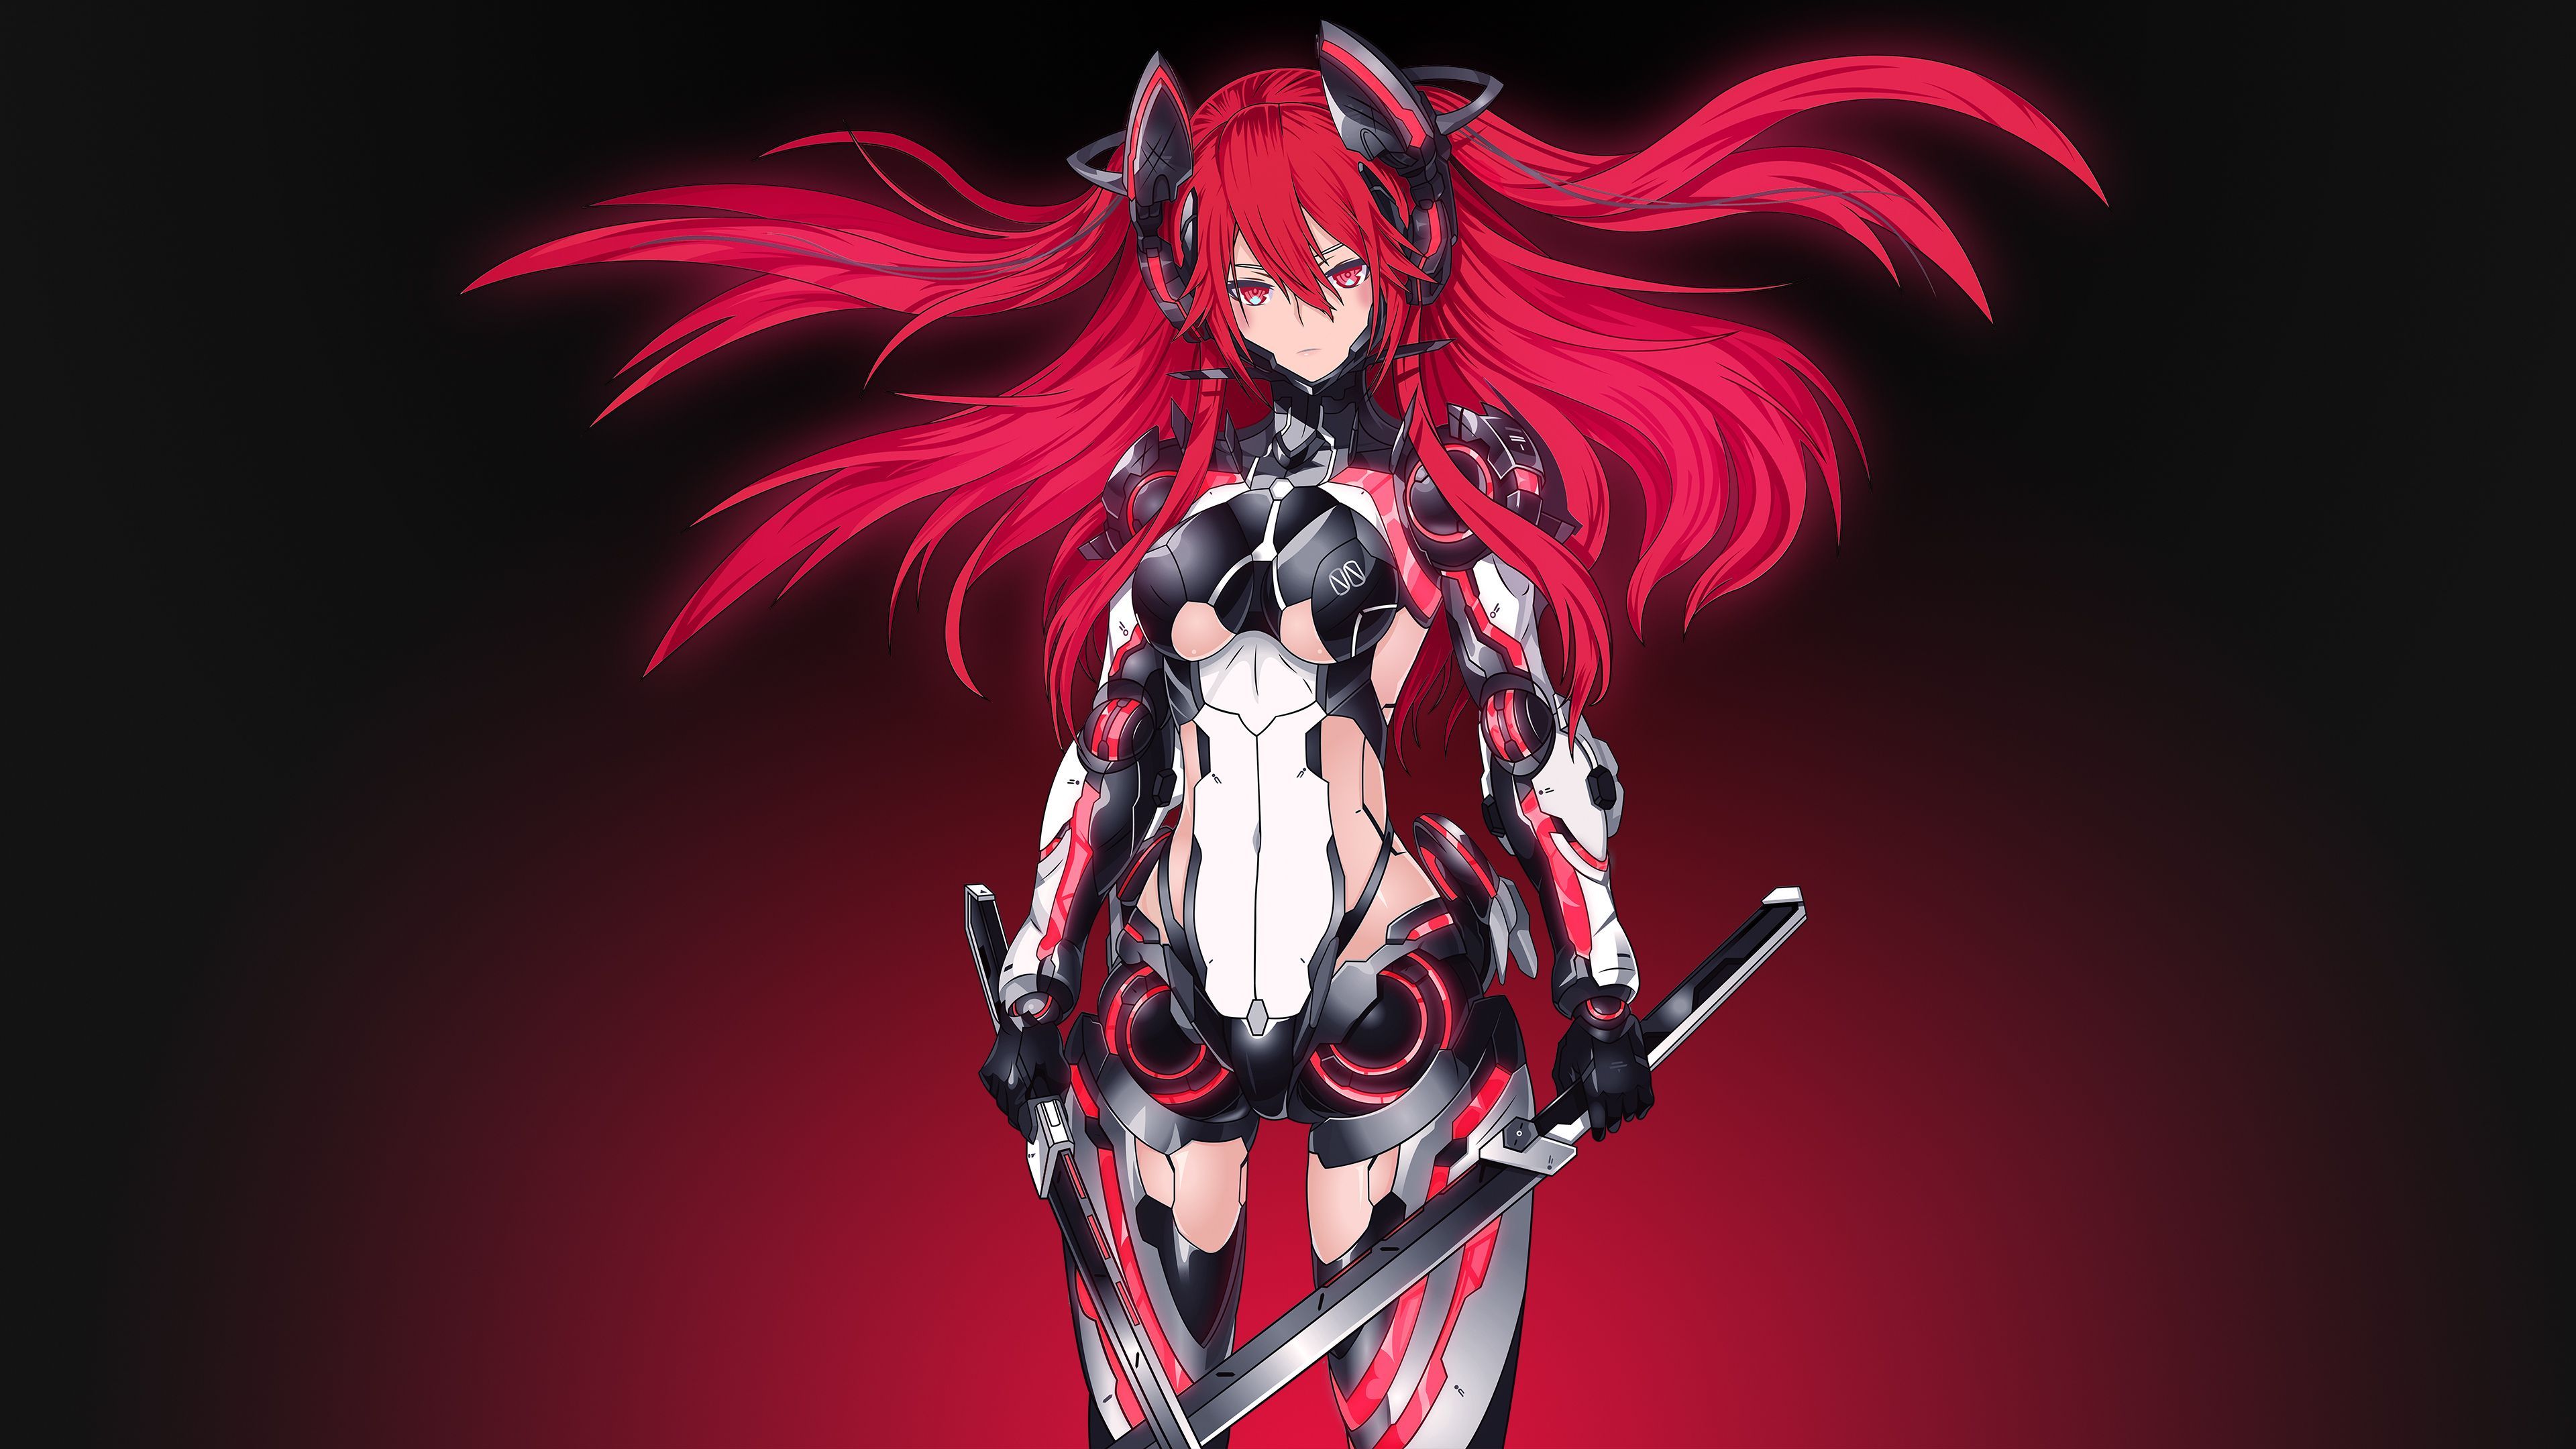 Mecha Girl Red Edition HD Wallpaper From Gallsource.com. HD anime